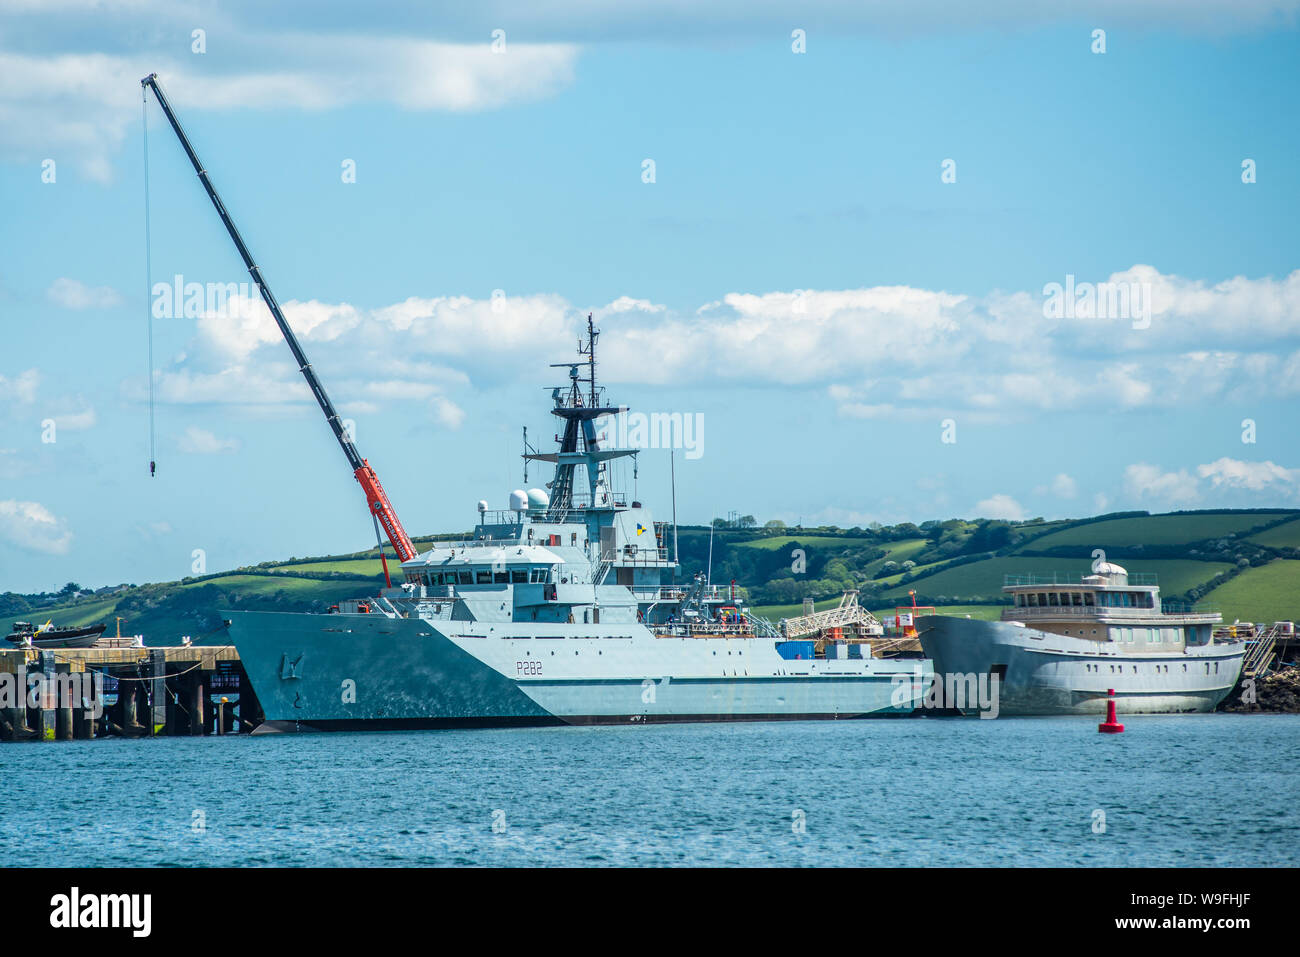 The ninth and latest HMS Severn is a River-class offshore patrol vessel of the British Royal Navy at Falmouth in Cornwall, England, UK Stock Photo